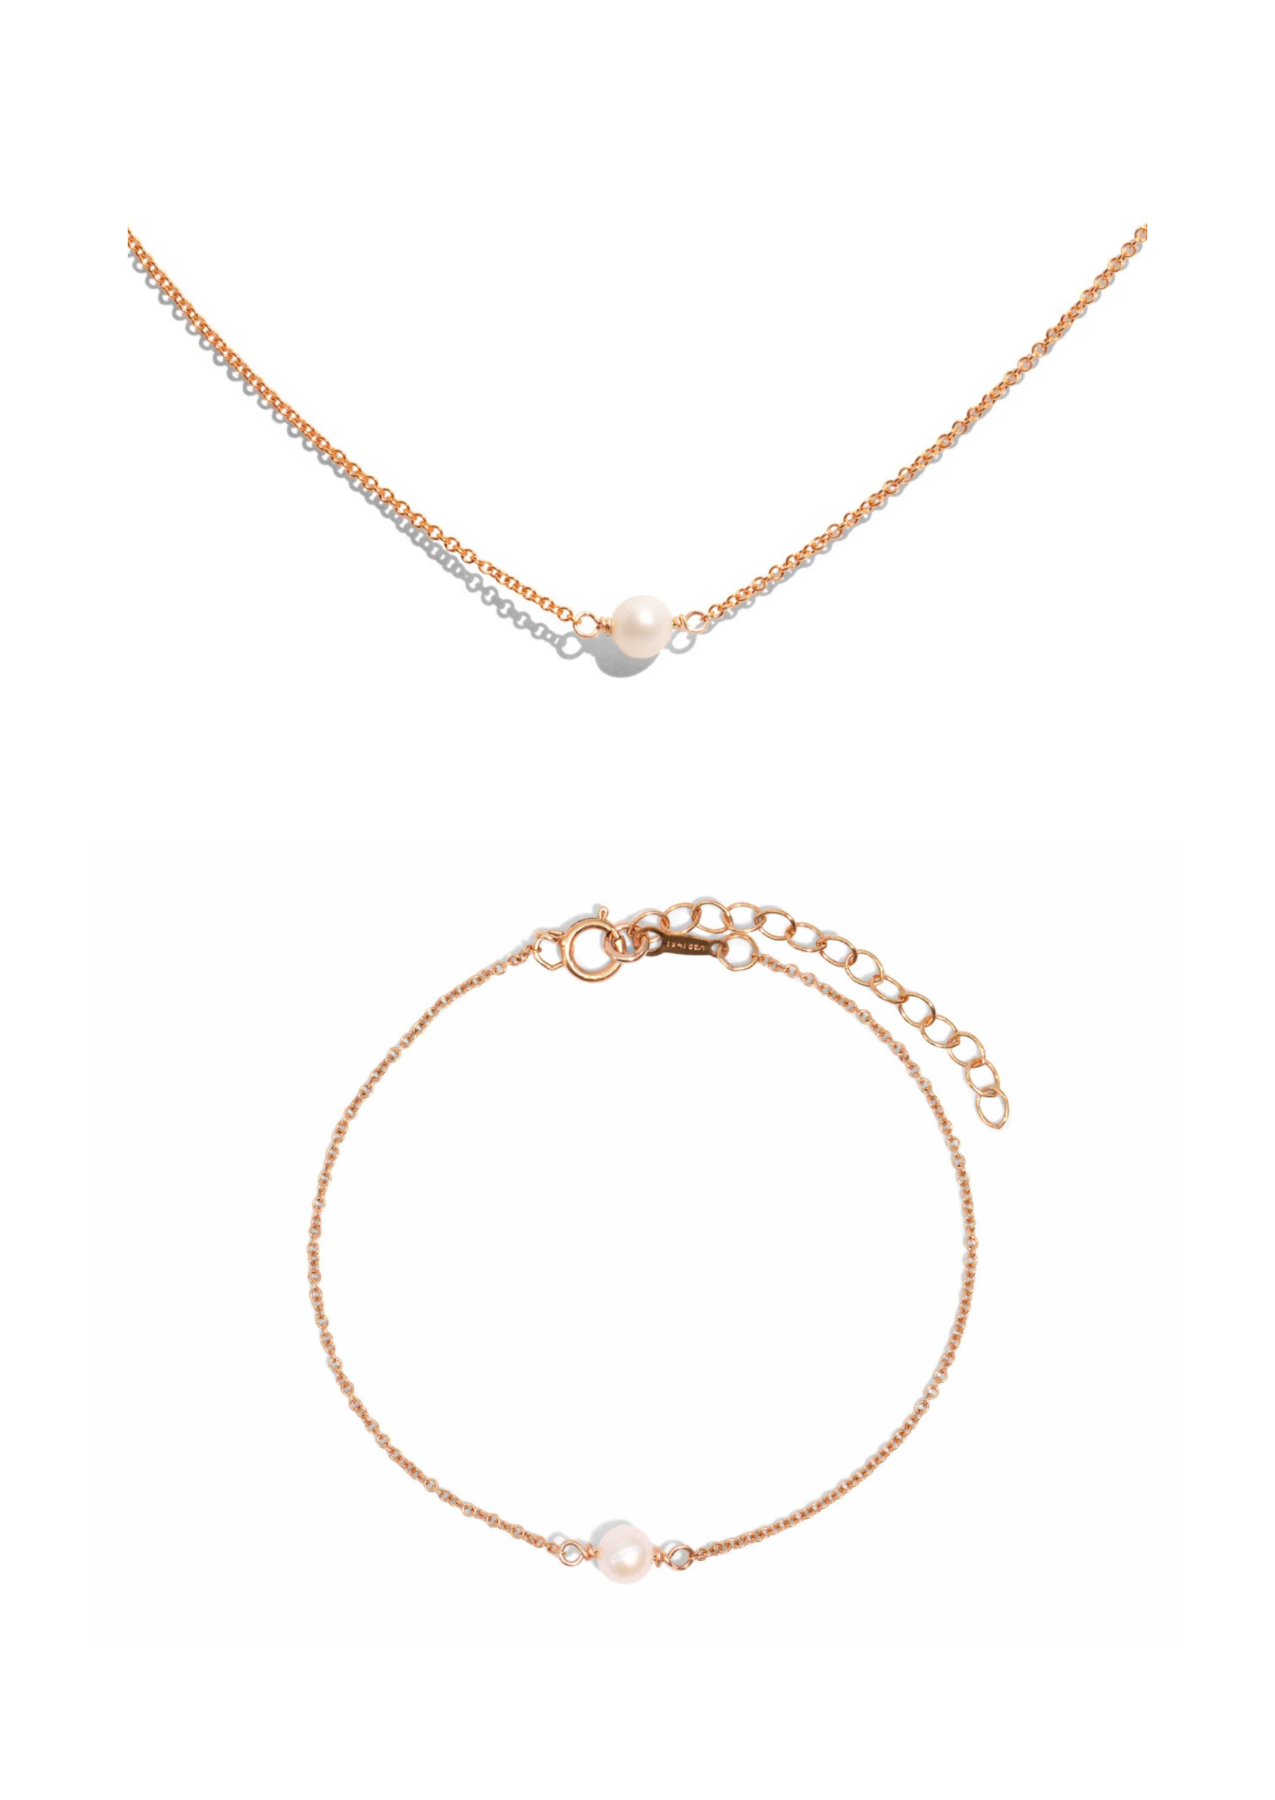 The Raindrop Rose Gold Curation